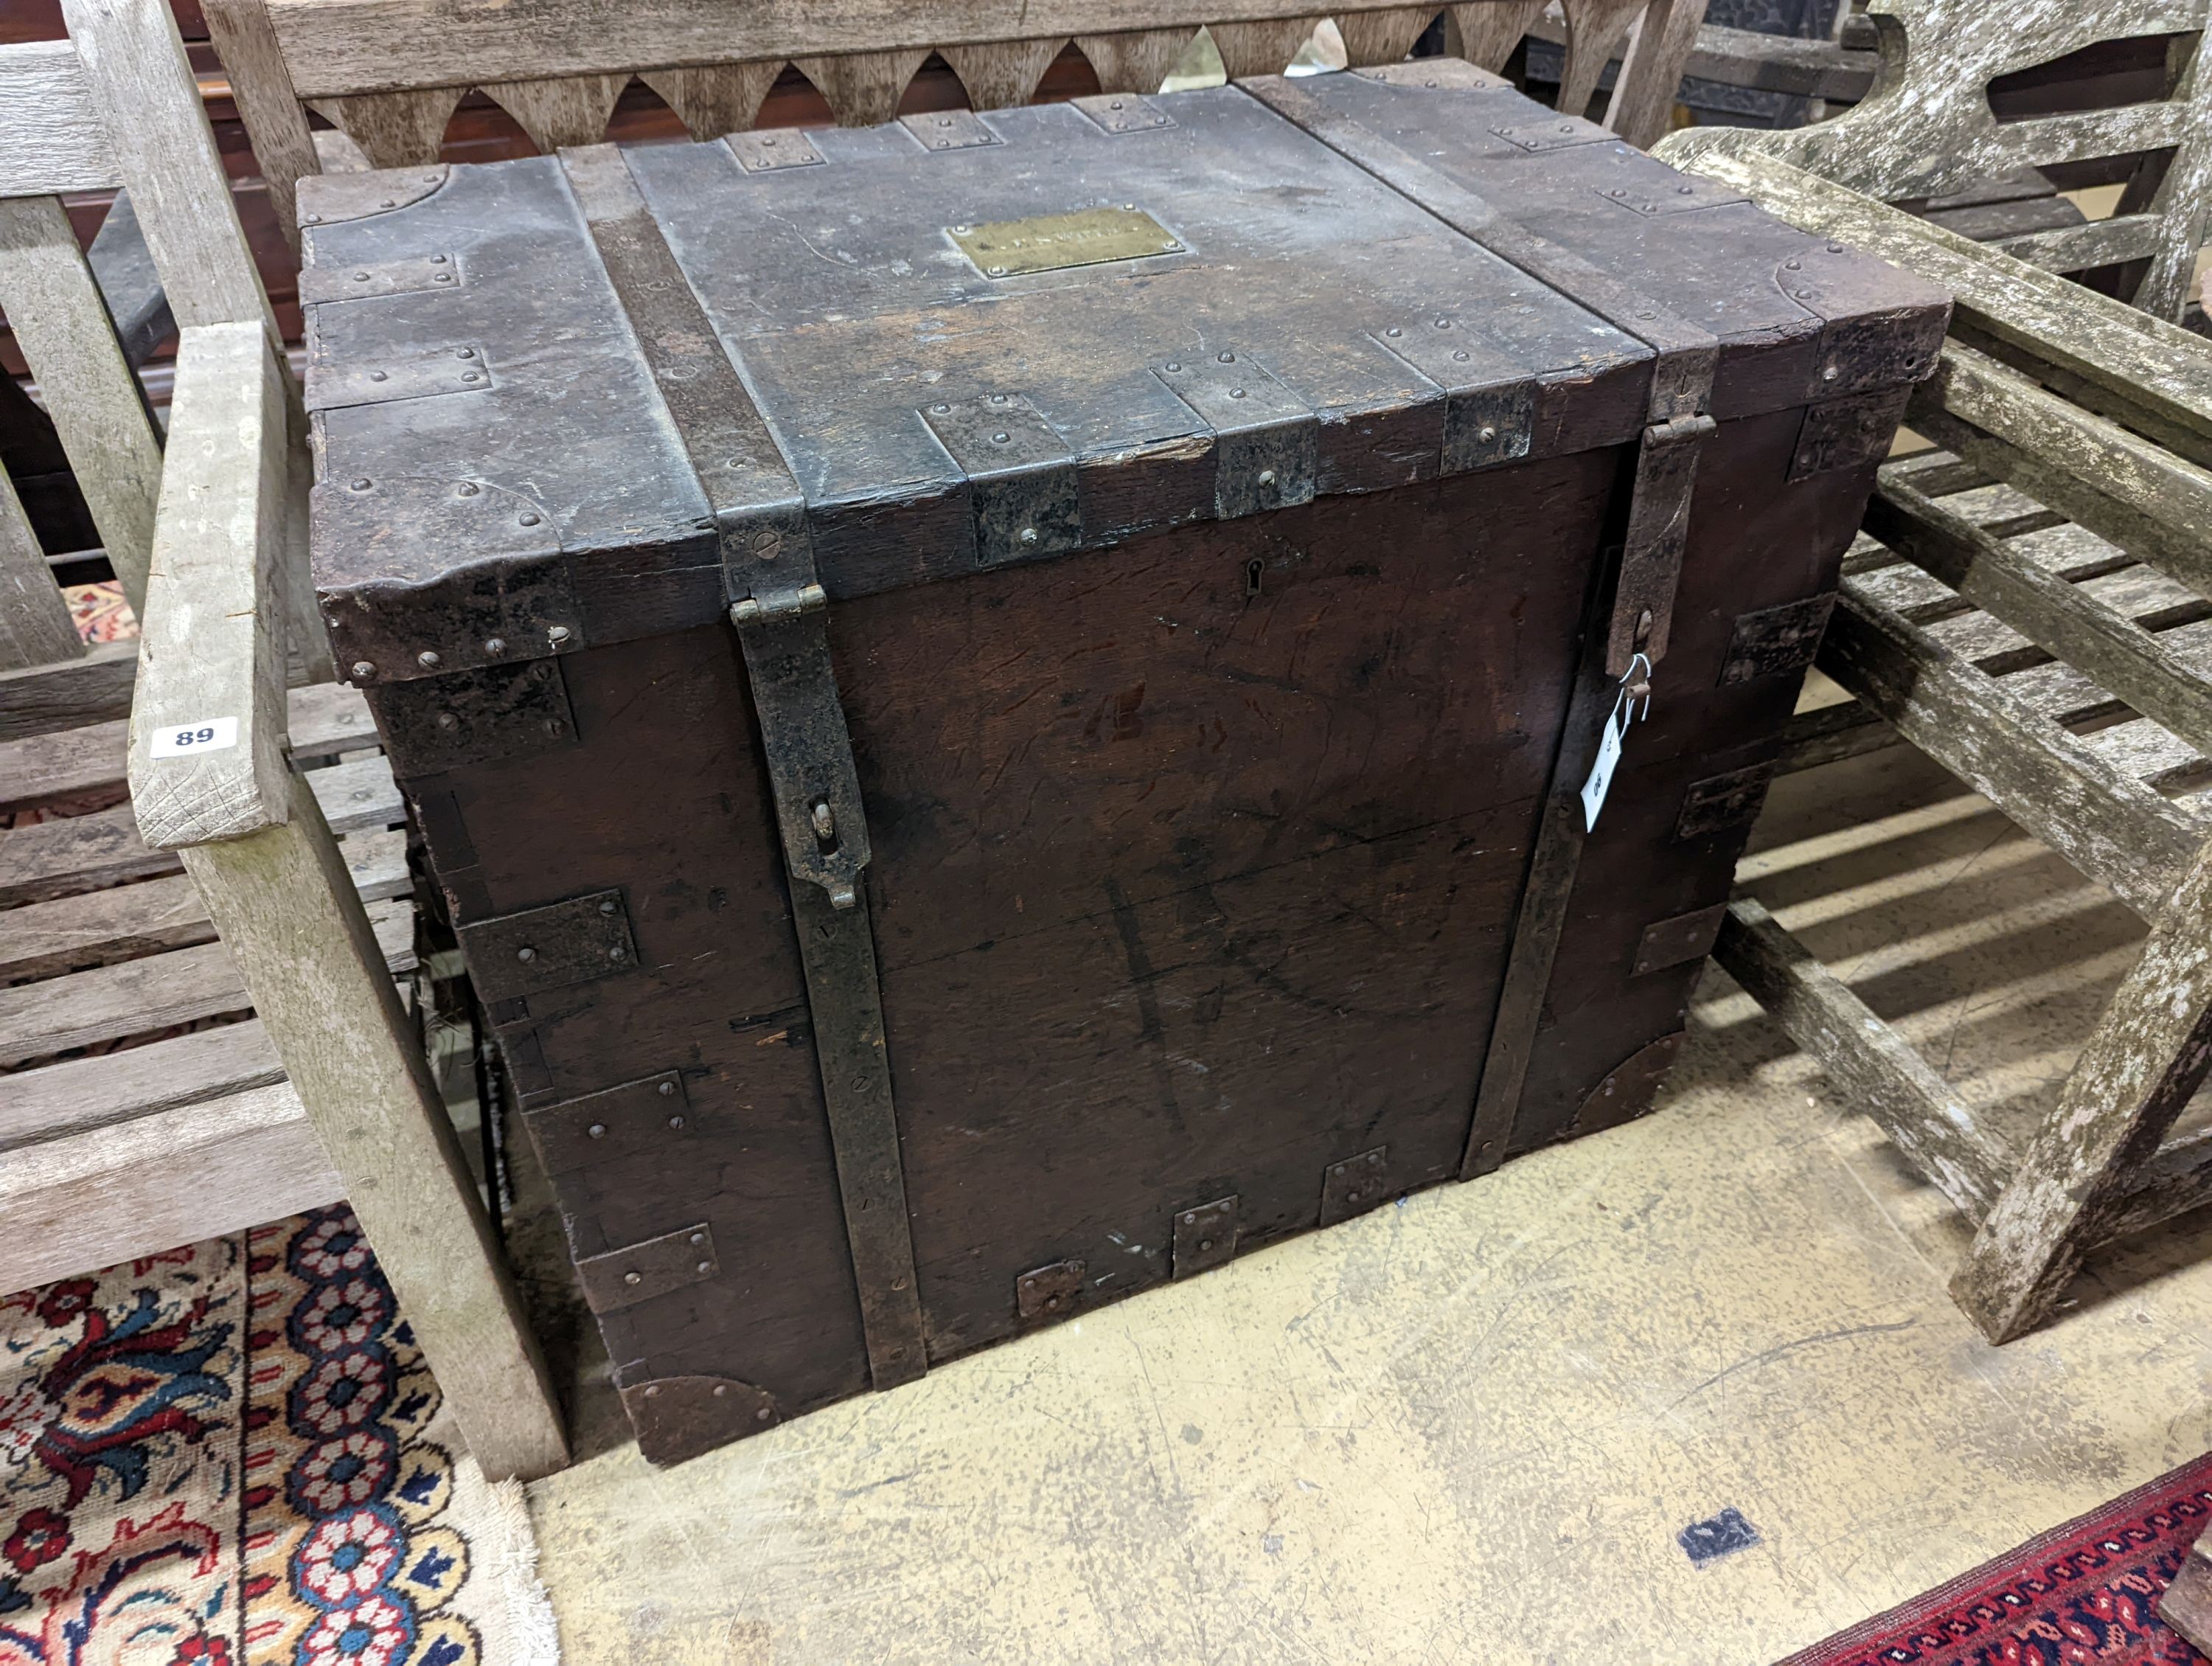 A Victorian oak and ironbound silver chest bears engraved brass plaque E S Wills, length 83cm, depth 53cm, height 69cm